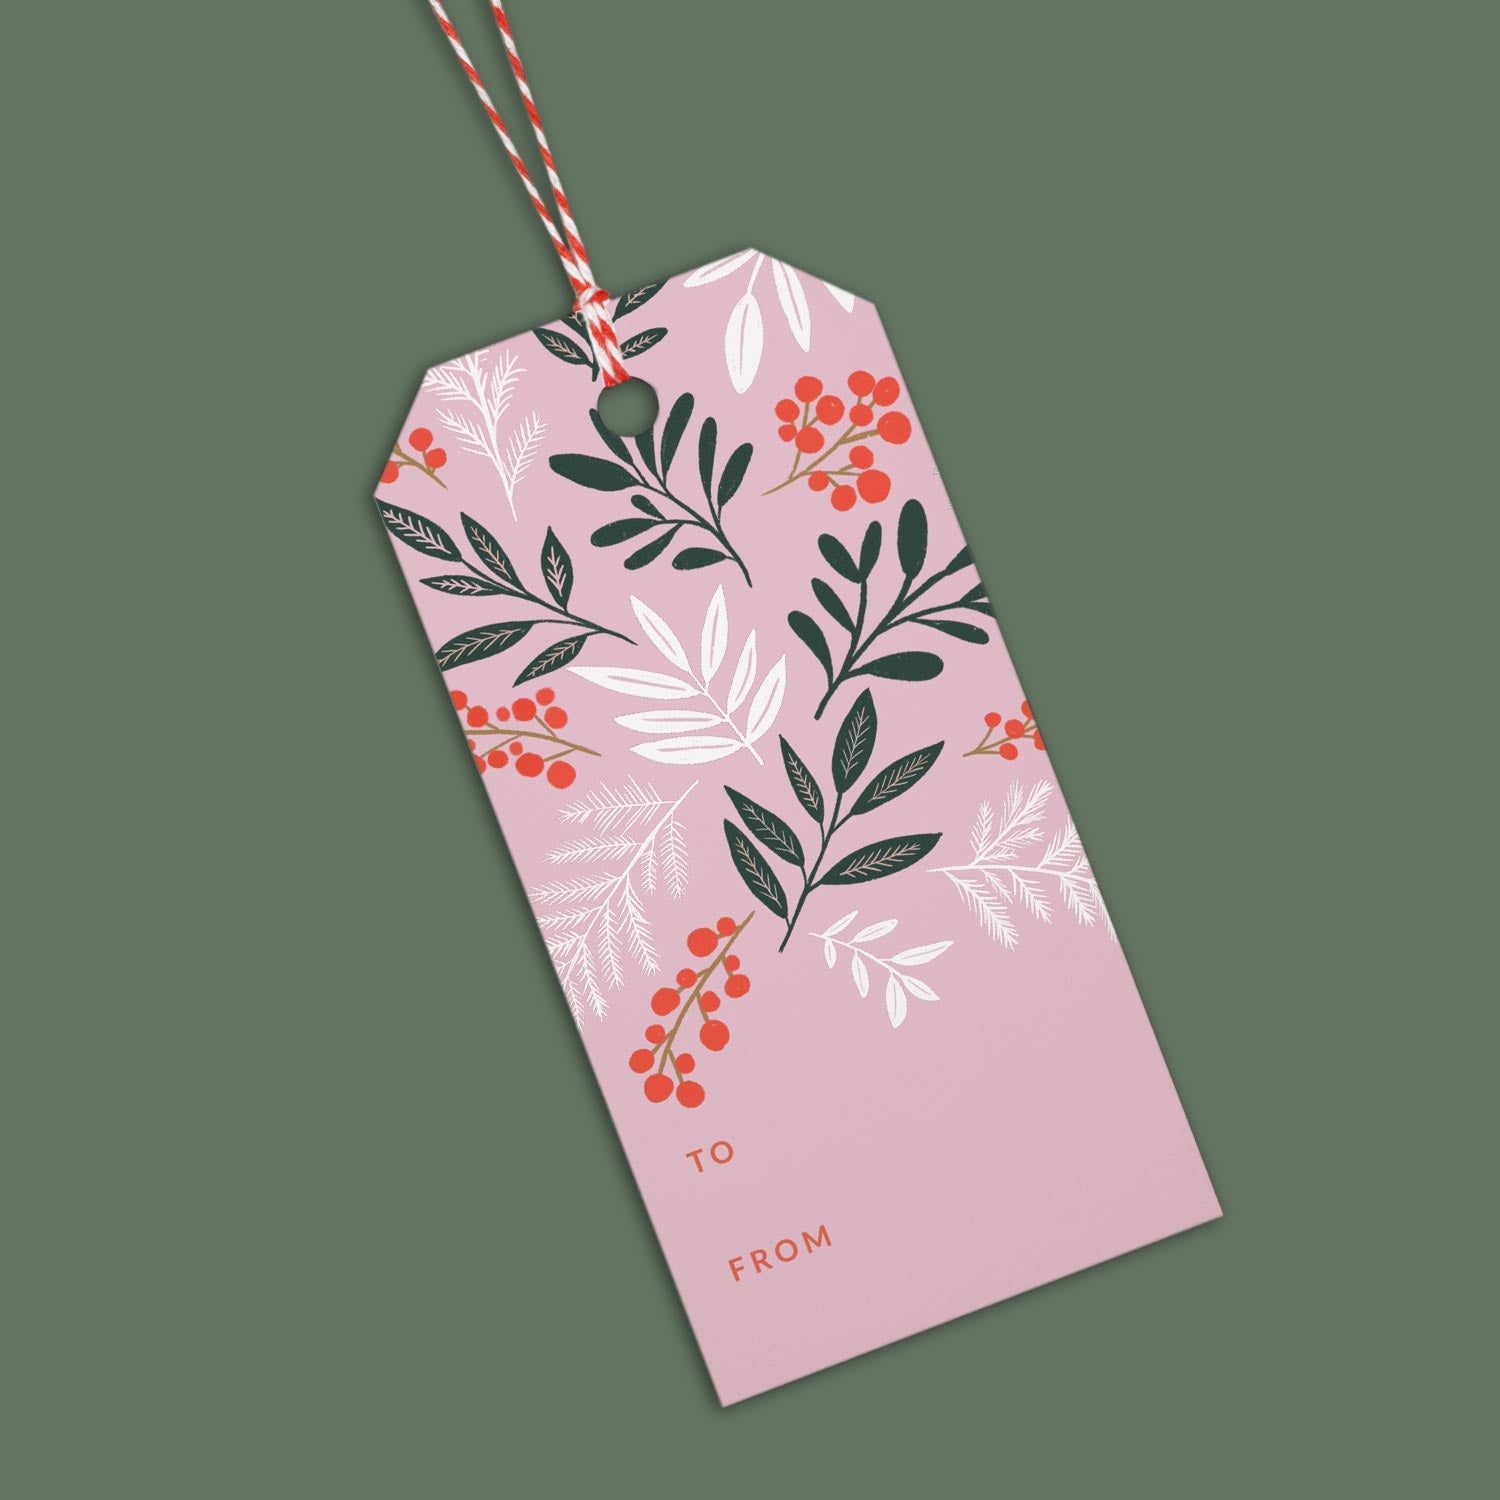 Gift Tag Template in PSD - FREE Download